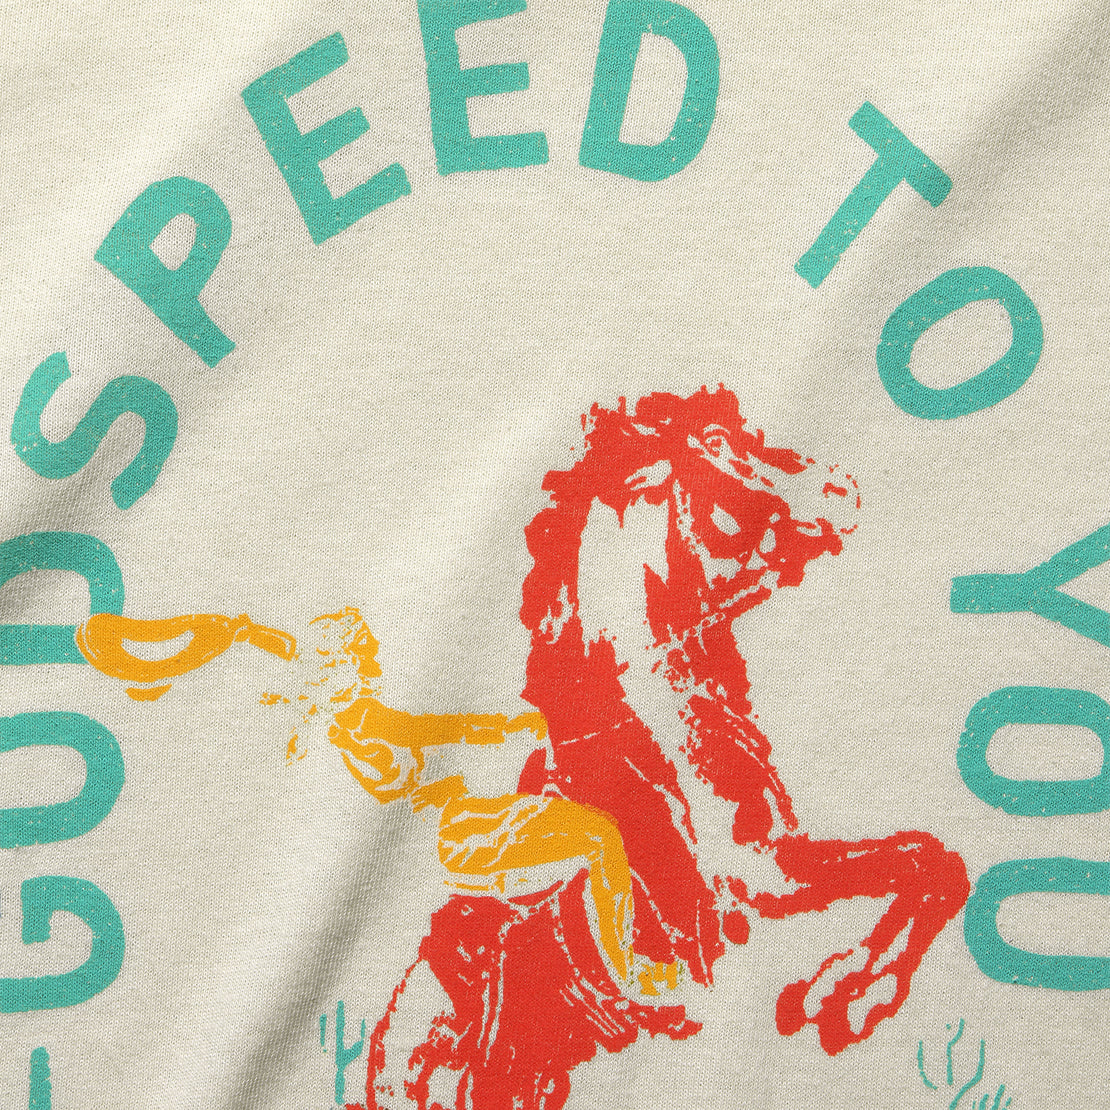 Godspeed Tee - Vintage White - Imogene + Willie - STAG Provisions - Tops - S/S Tee - Graphic